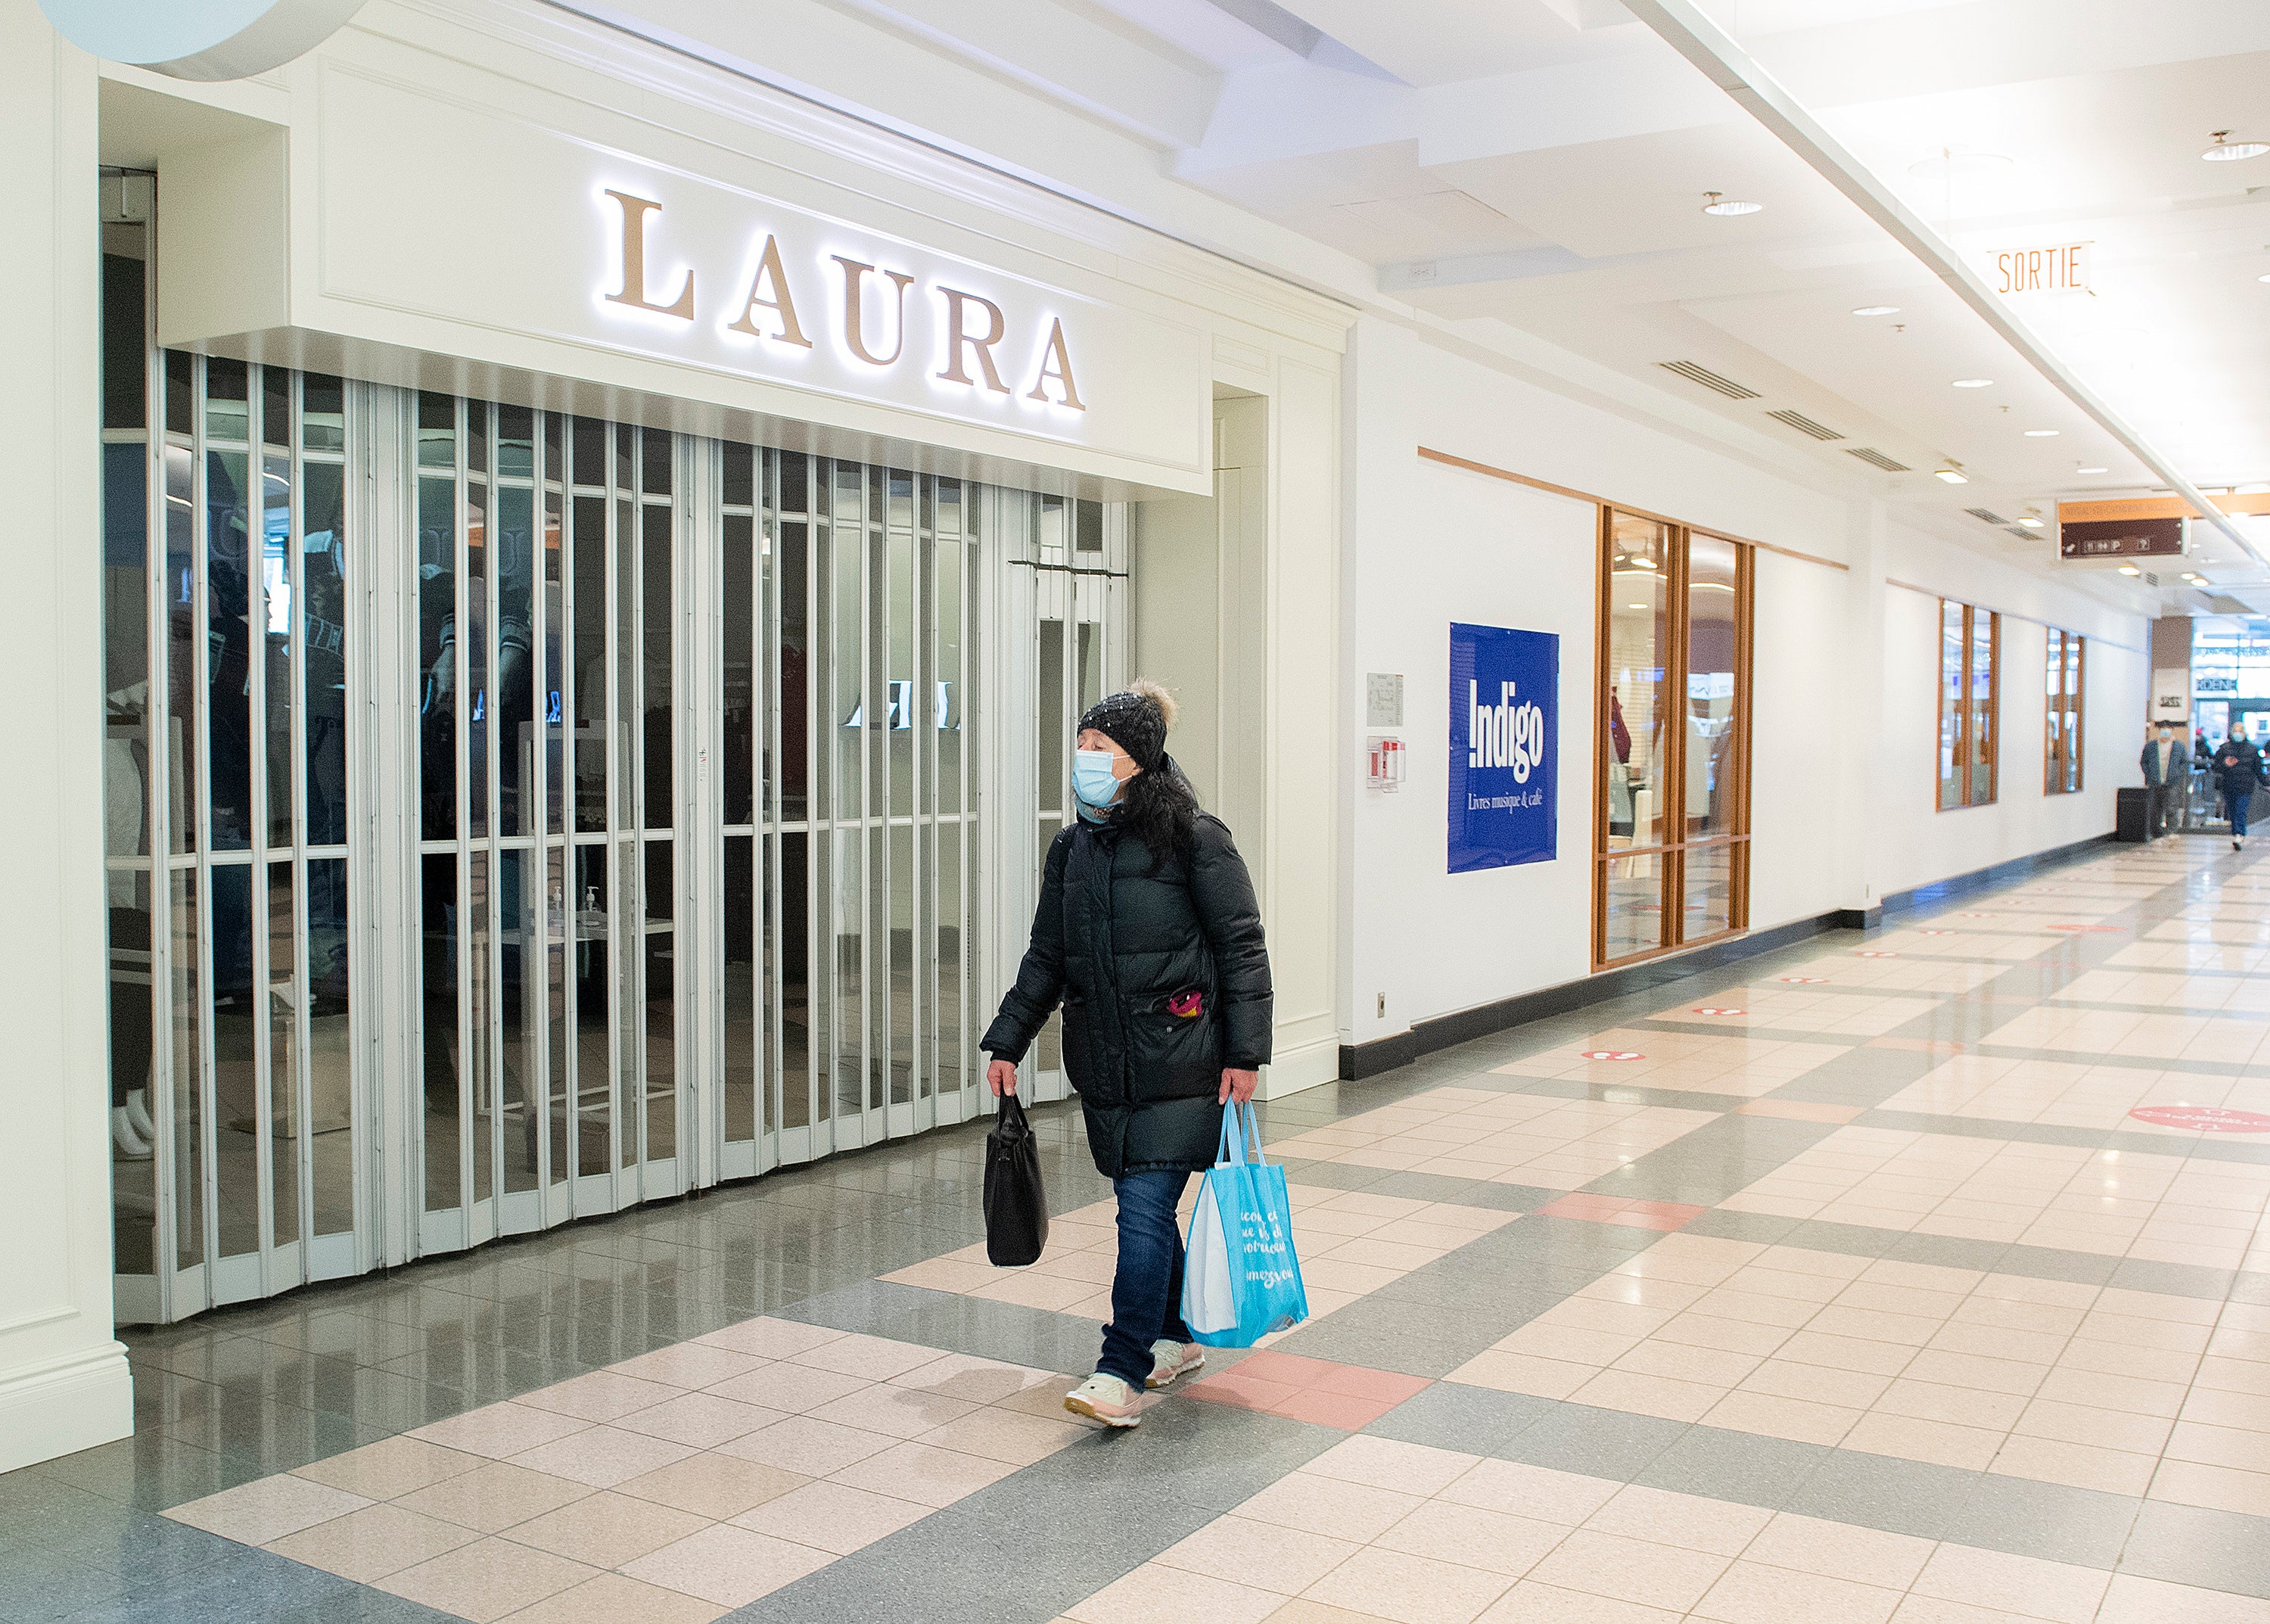 <p>A woman walks by a closed store in a mall in Montreal, Sunday, Jan. 2, 2022, as the COVID-19 pandemic continues in Canada. Some measures put in place by the Quebec government, including the closure of stores, go into effect today to help curb the spread of COVID-19 in the province.  (Graham Hughes /The Canadian Press via AP)</p>